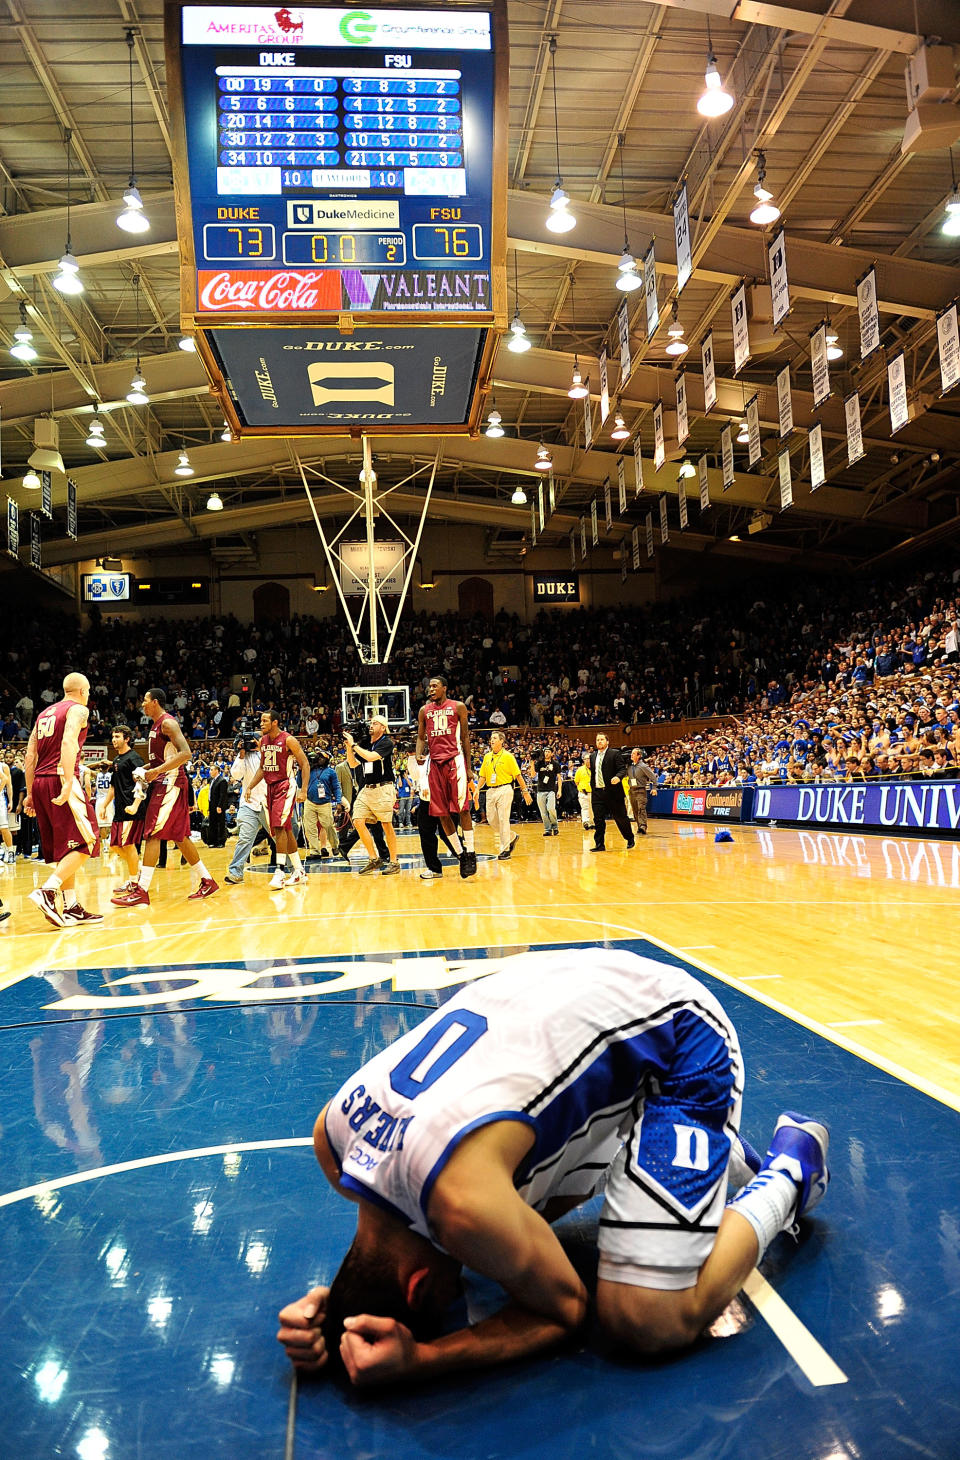 DURHAM, NC - JANUARY 21: Austin Rivers #0 of the Duke Blue Devils reacts after a loss to the Florida State Seminoles at the buzzer at Cameron Indoor Stadium on January 21, 2012 in Durham, North Carolina. Florida State won 76-73 to end Duke's 44-game home winning streak. (Photo by Grant Halverson/Getty Images)